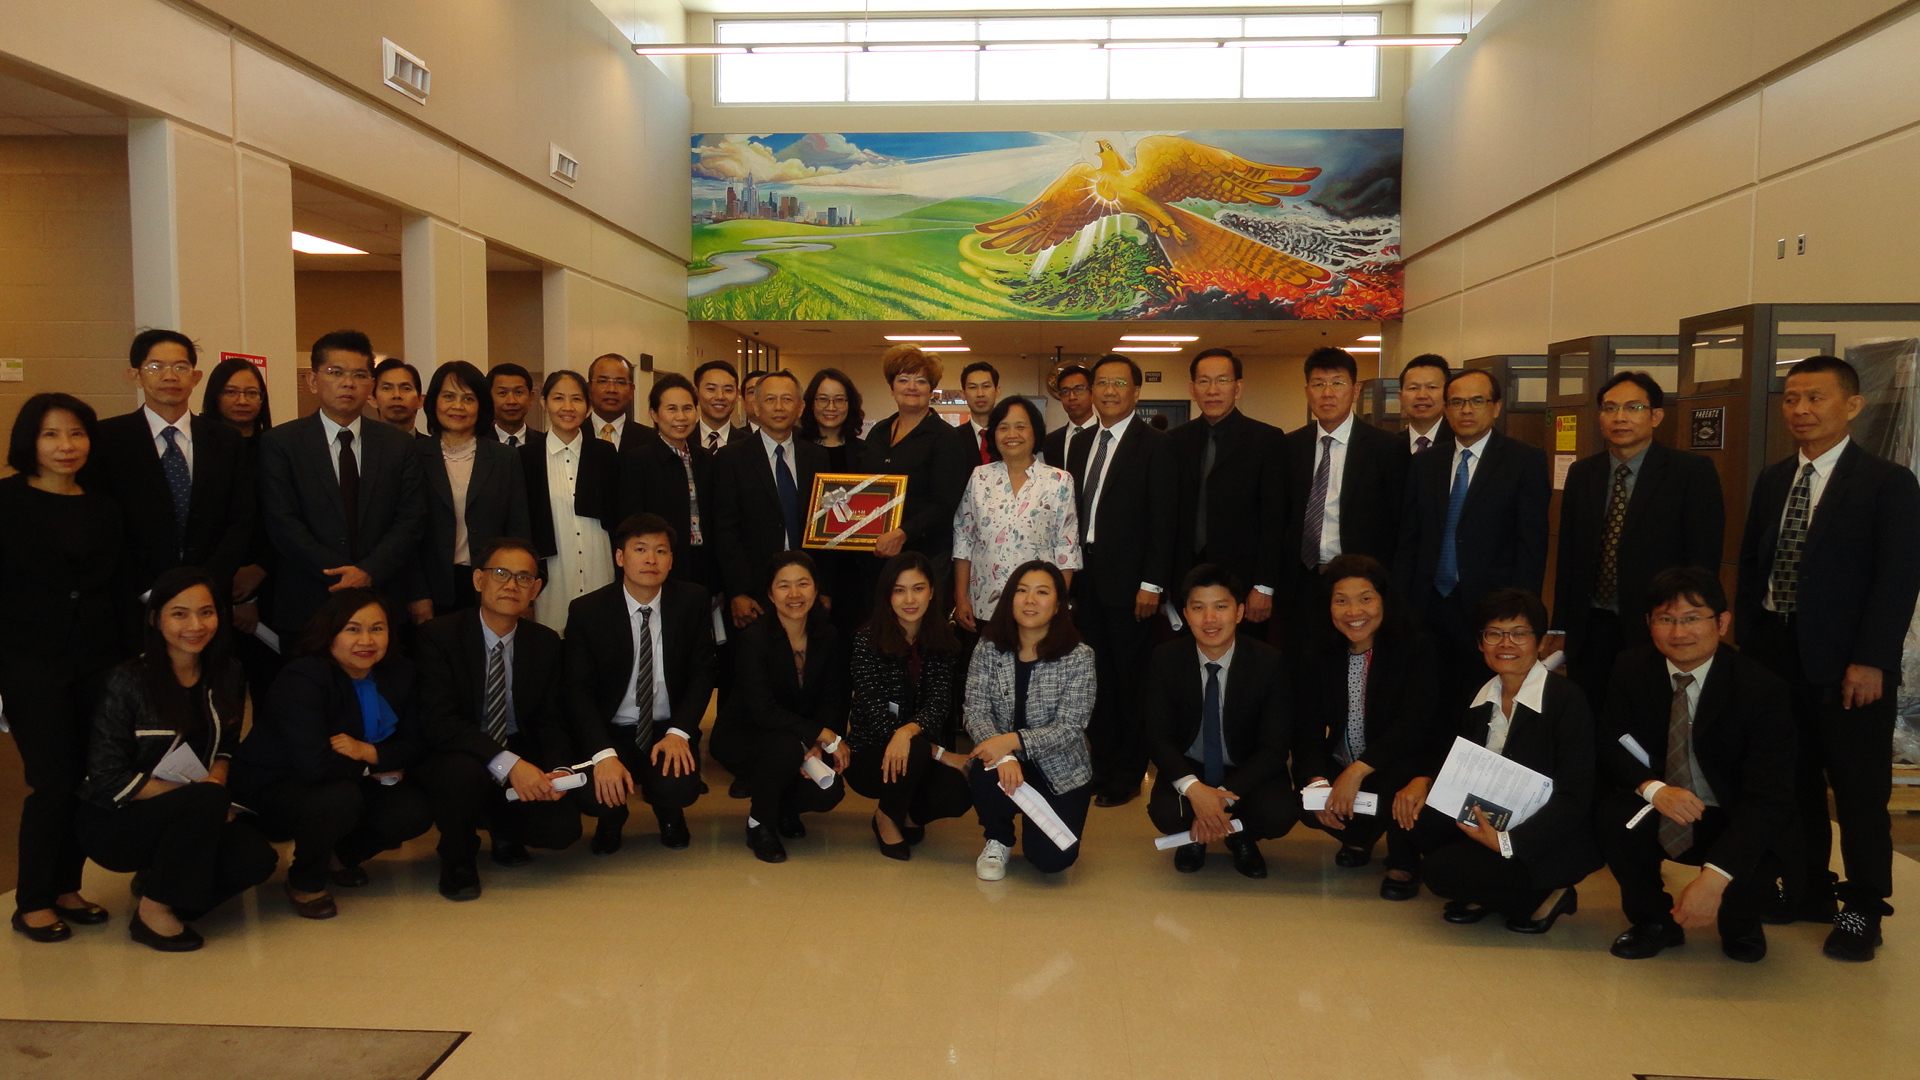 Supt. Tammi Ferguson stands with a delegation from Thailand